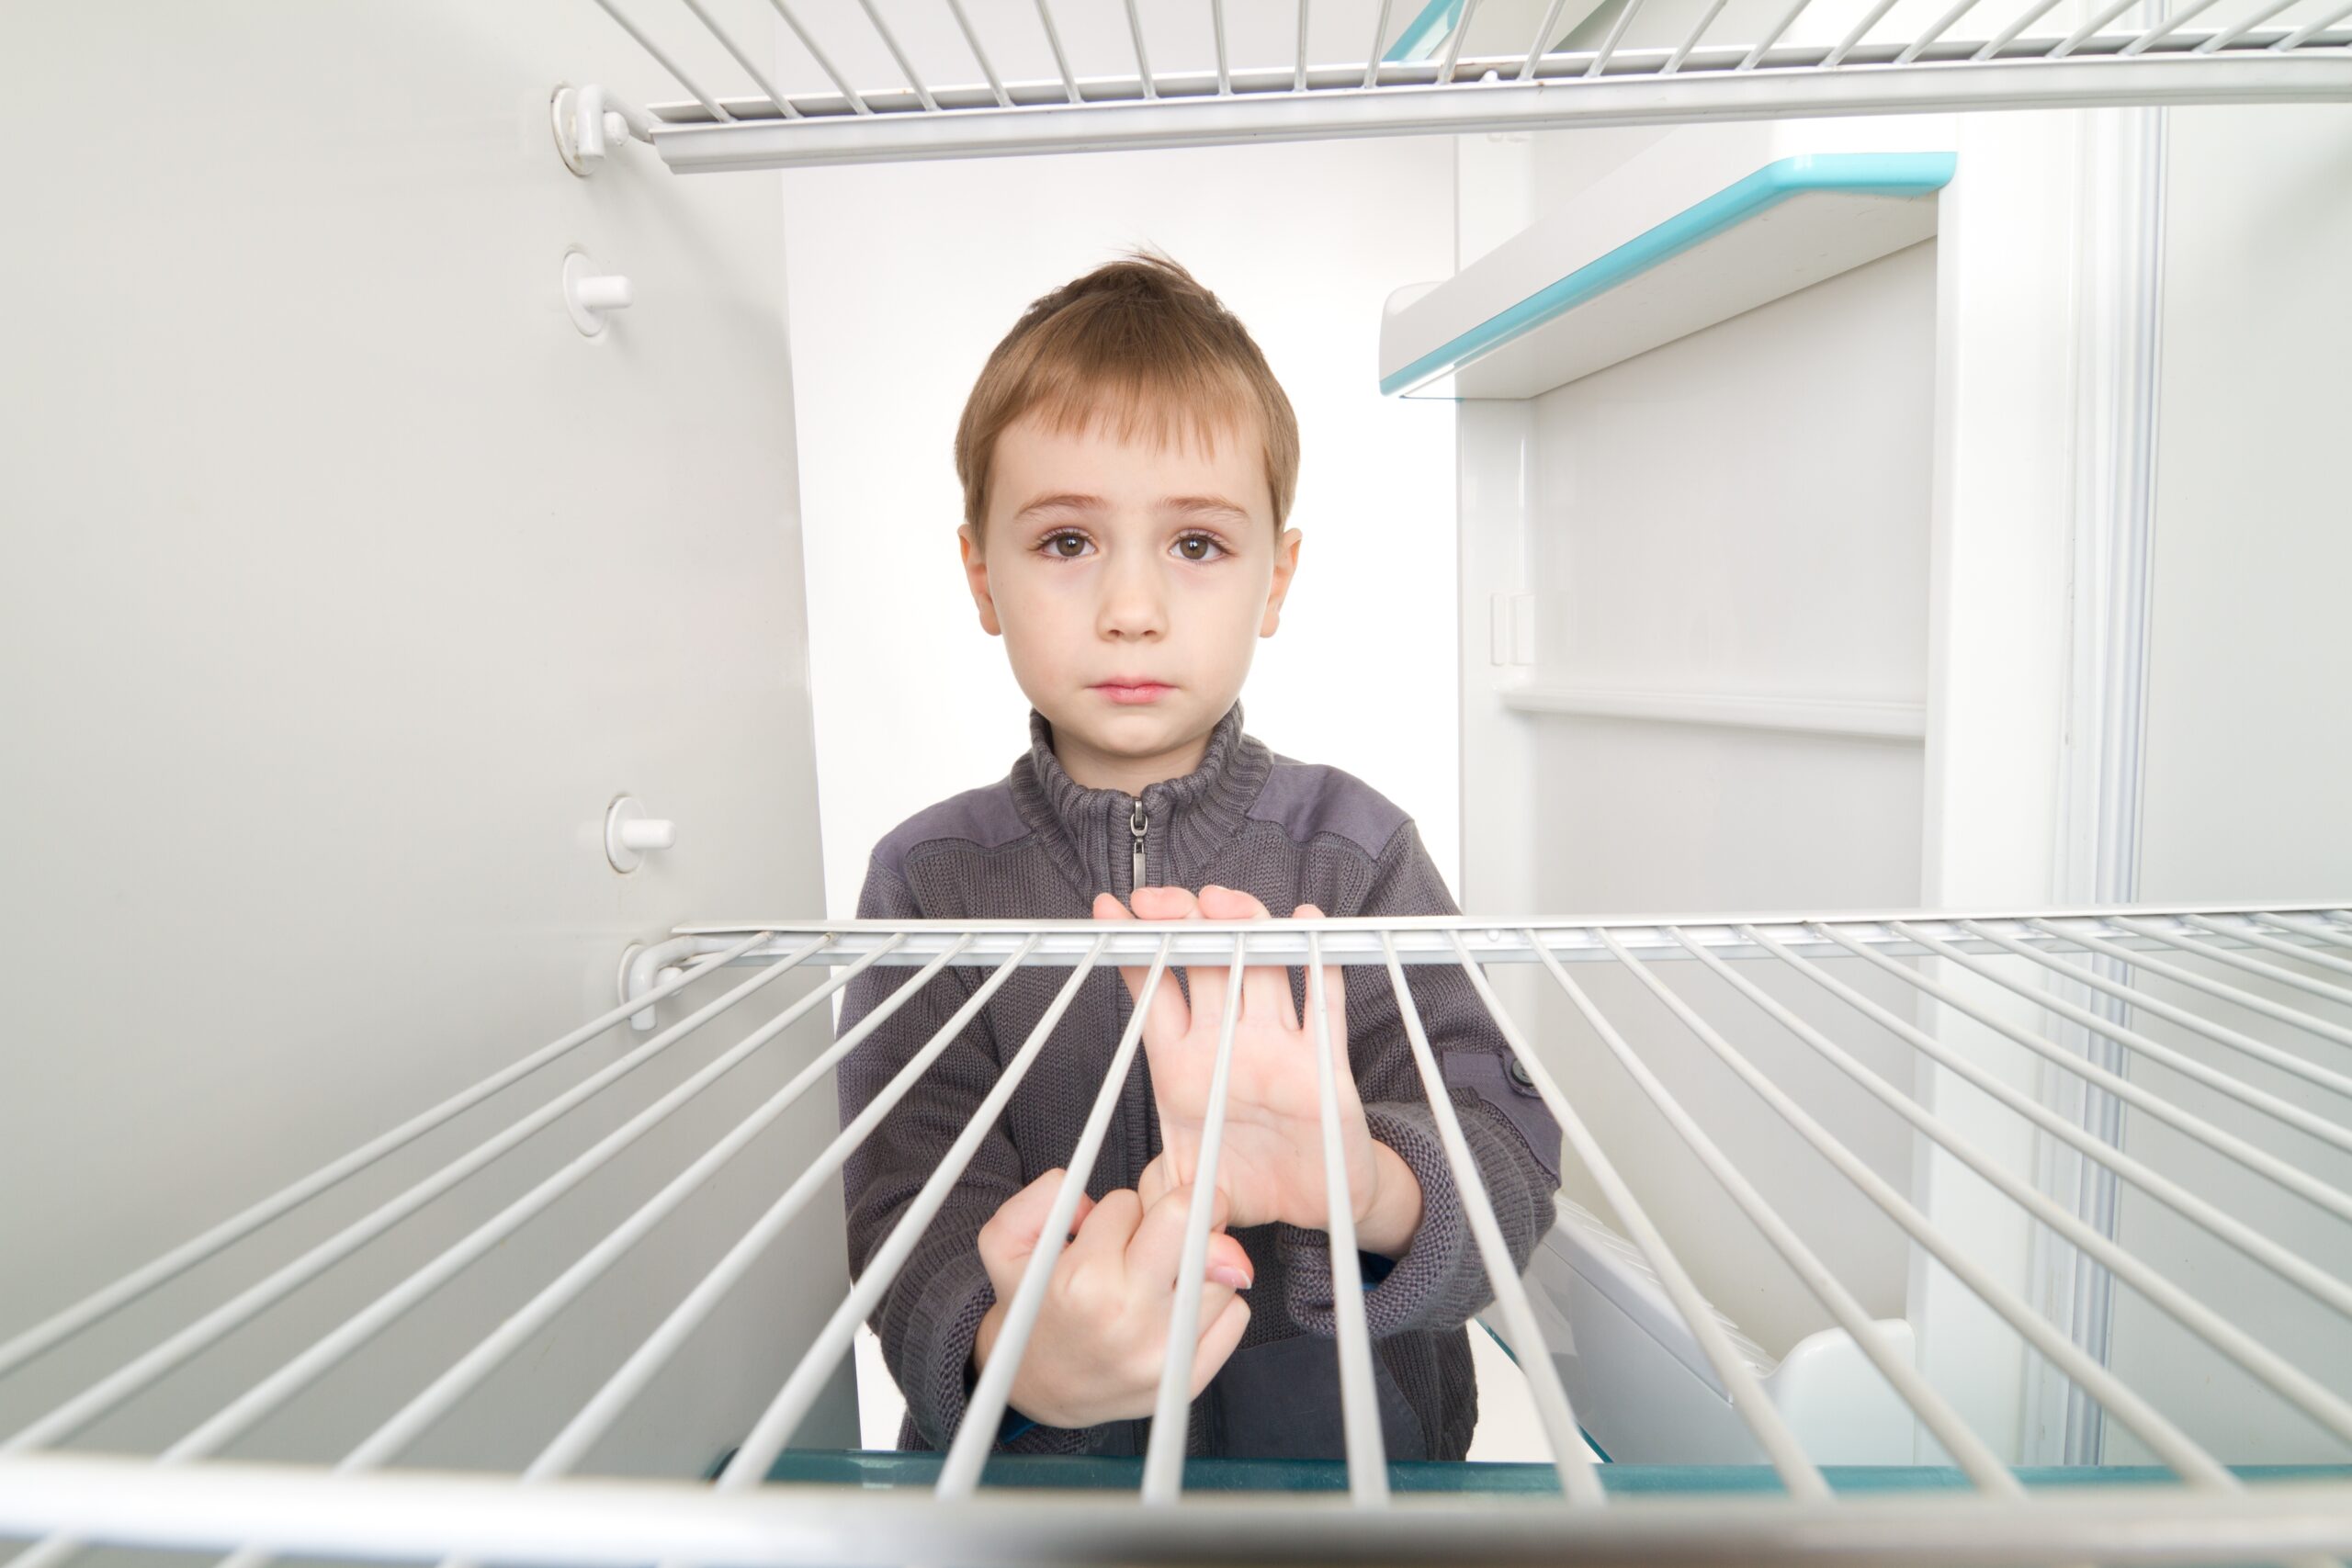 Food Insecurity in America: What Child Hunger Looks Like